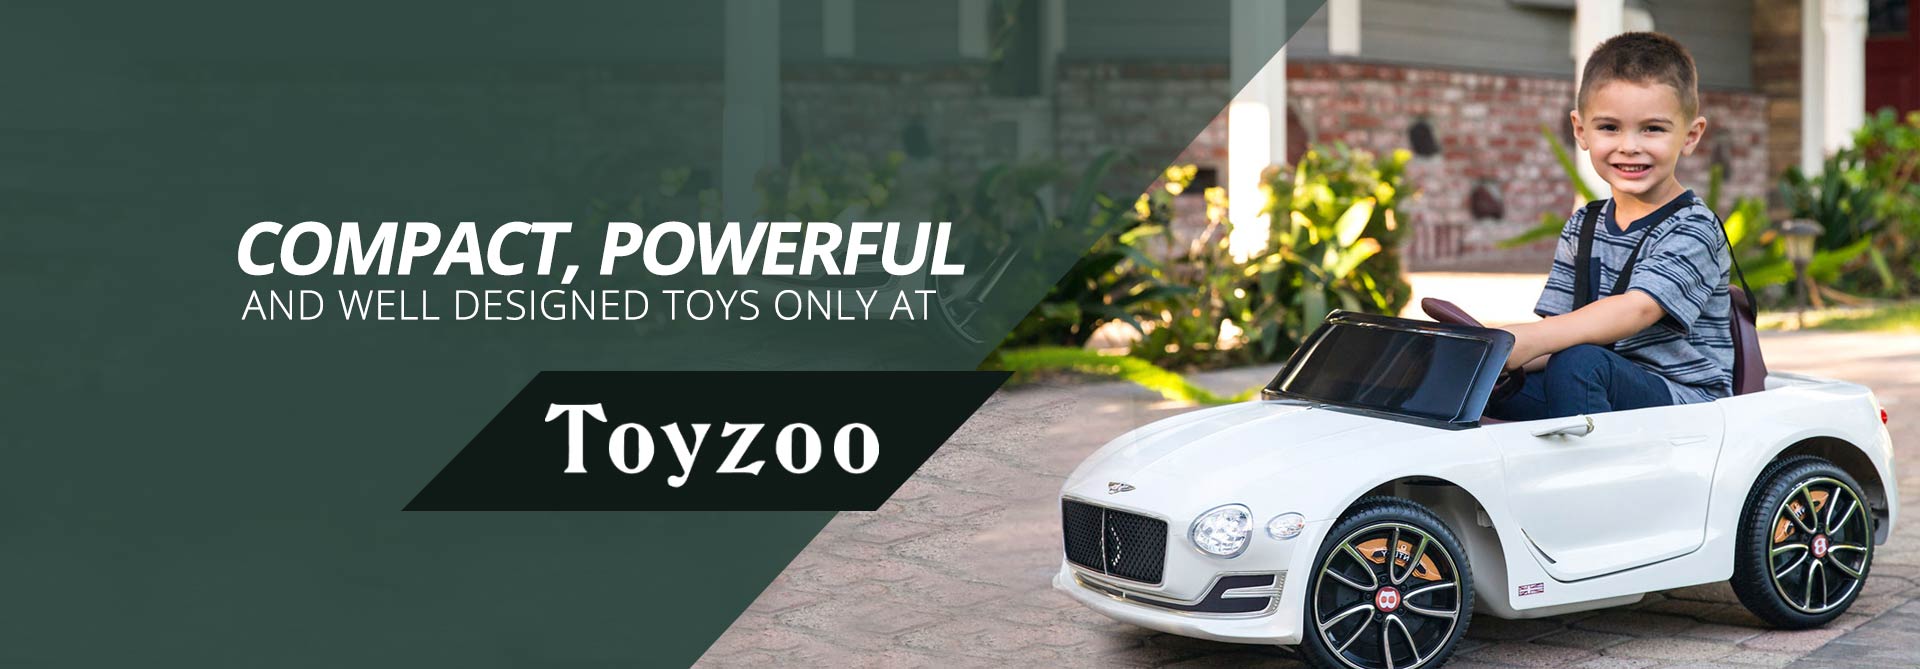  Compact, Powerful and well designed toys only at Toyzoo Manufacturers and Suppliers in India